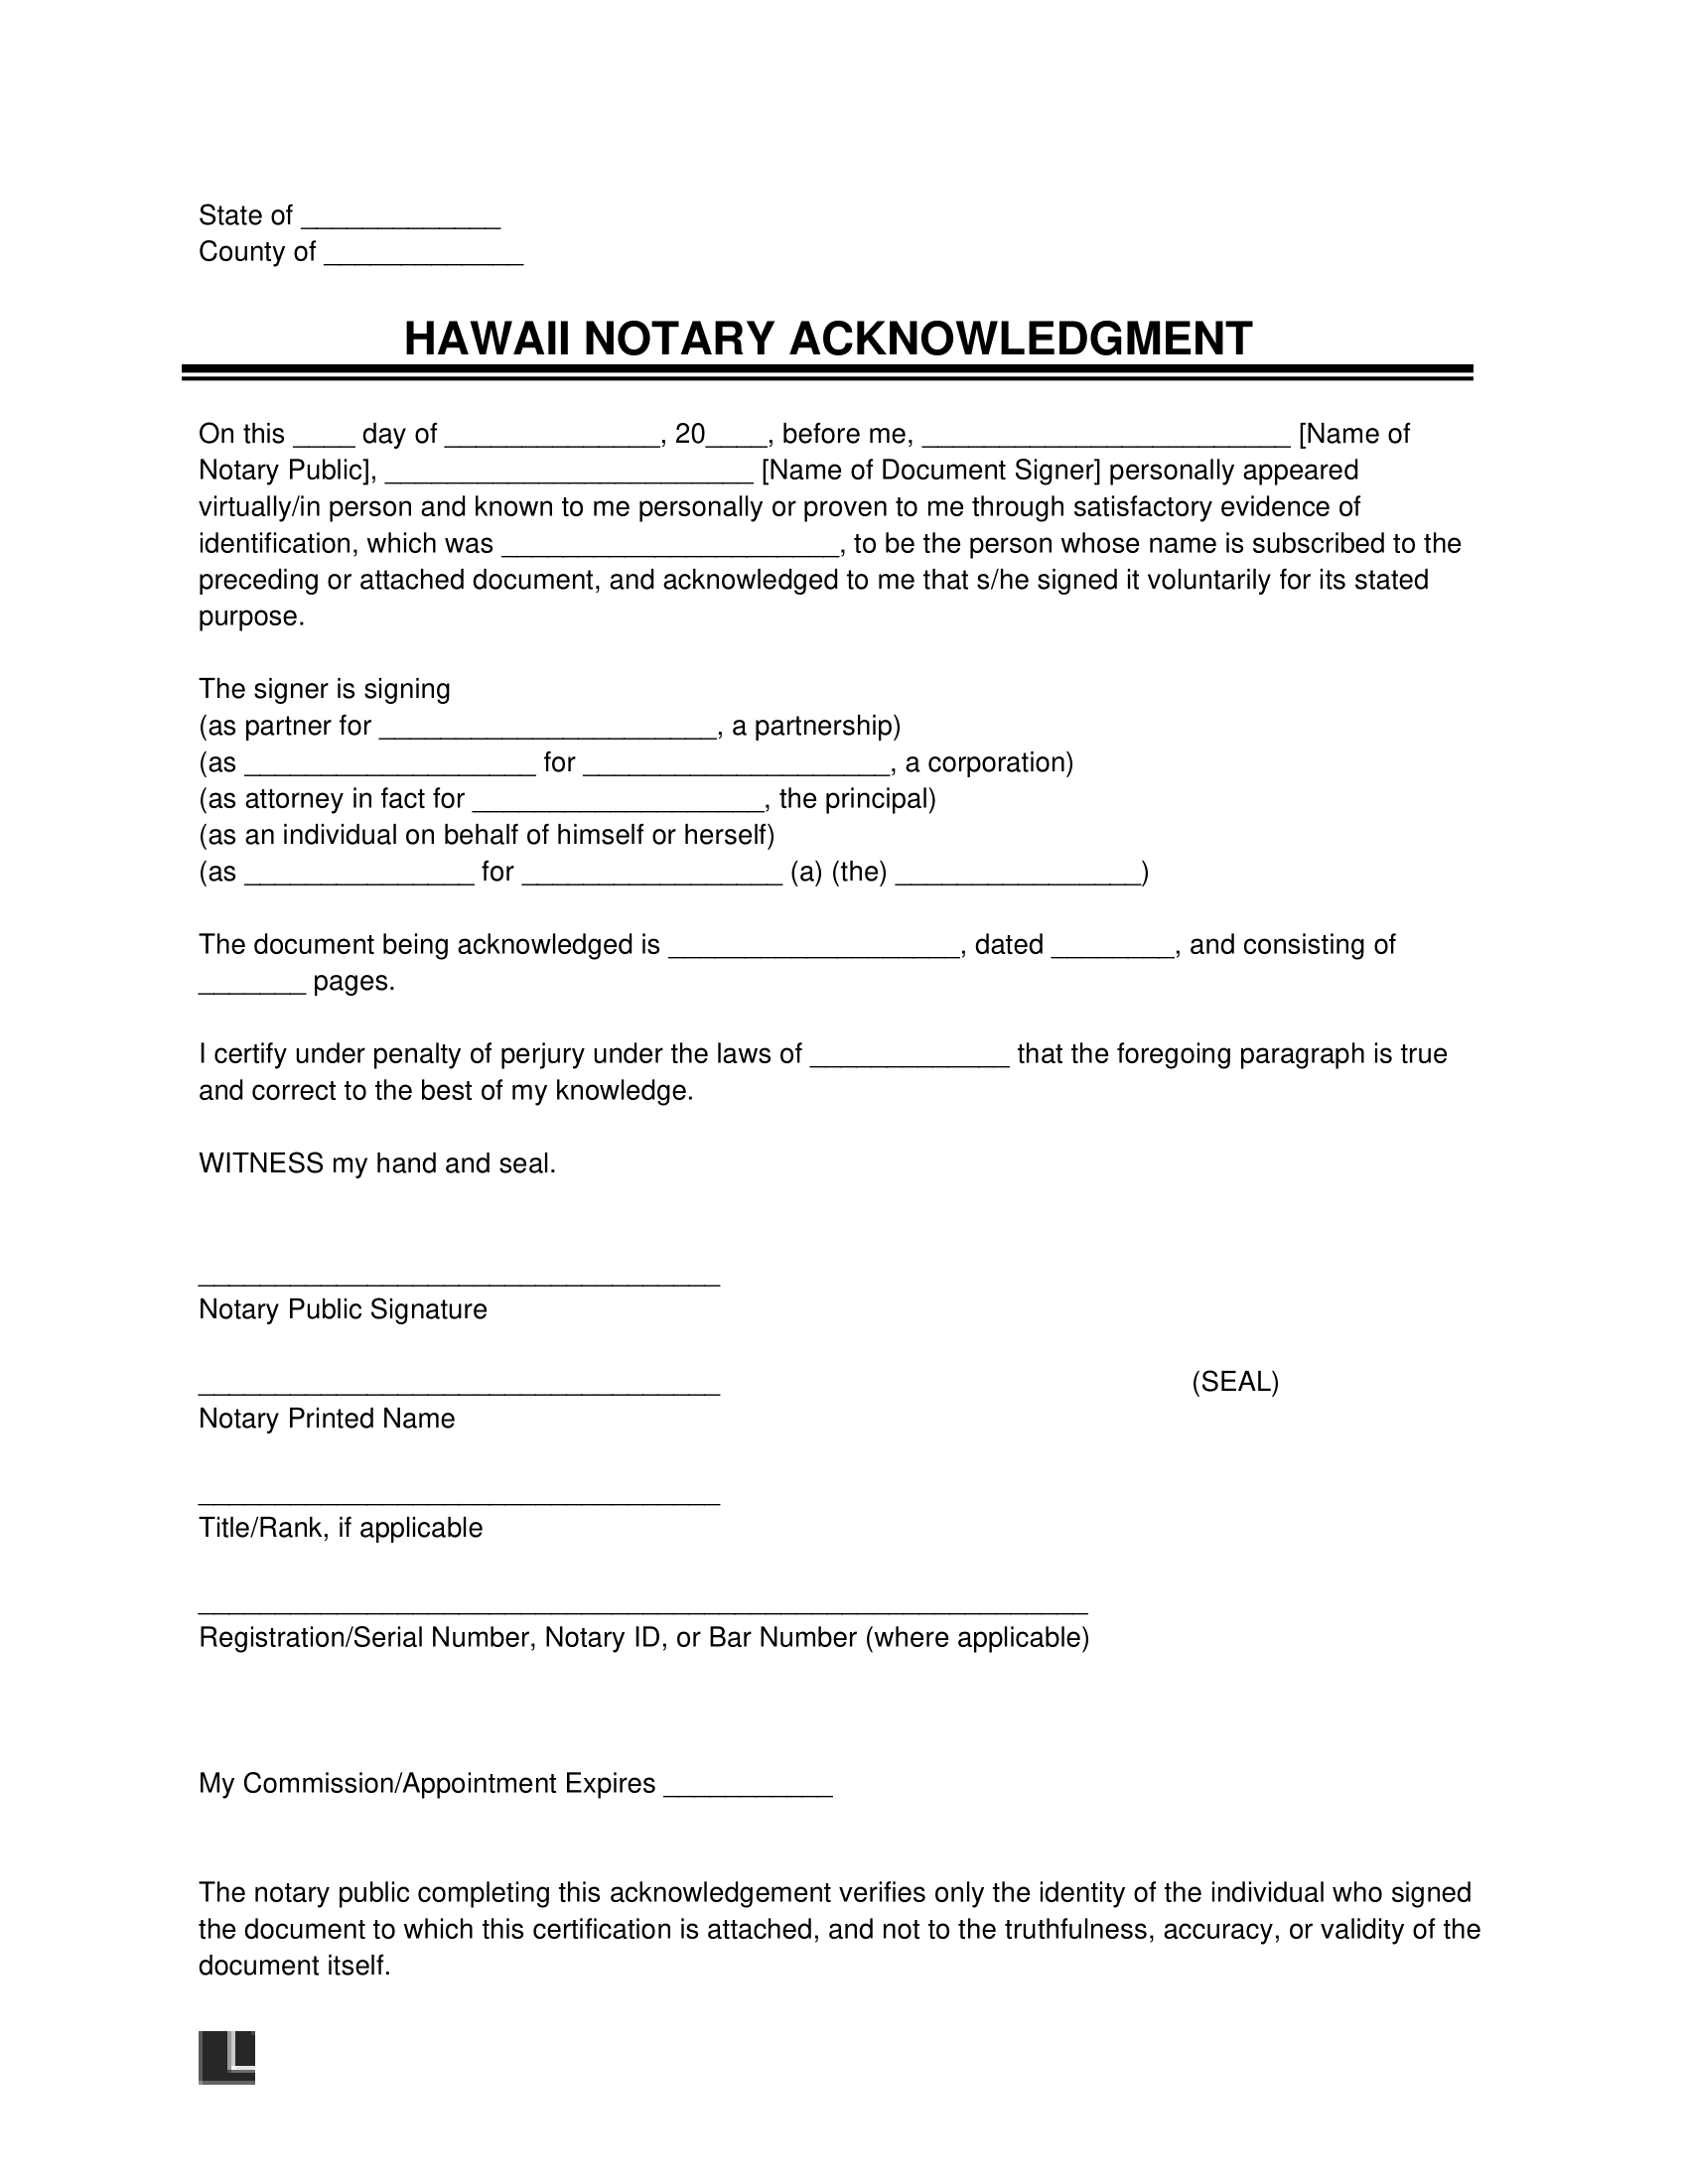 Hawaii Notary Acknowledgment Form